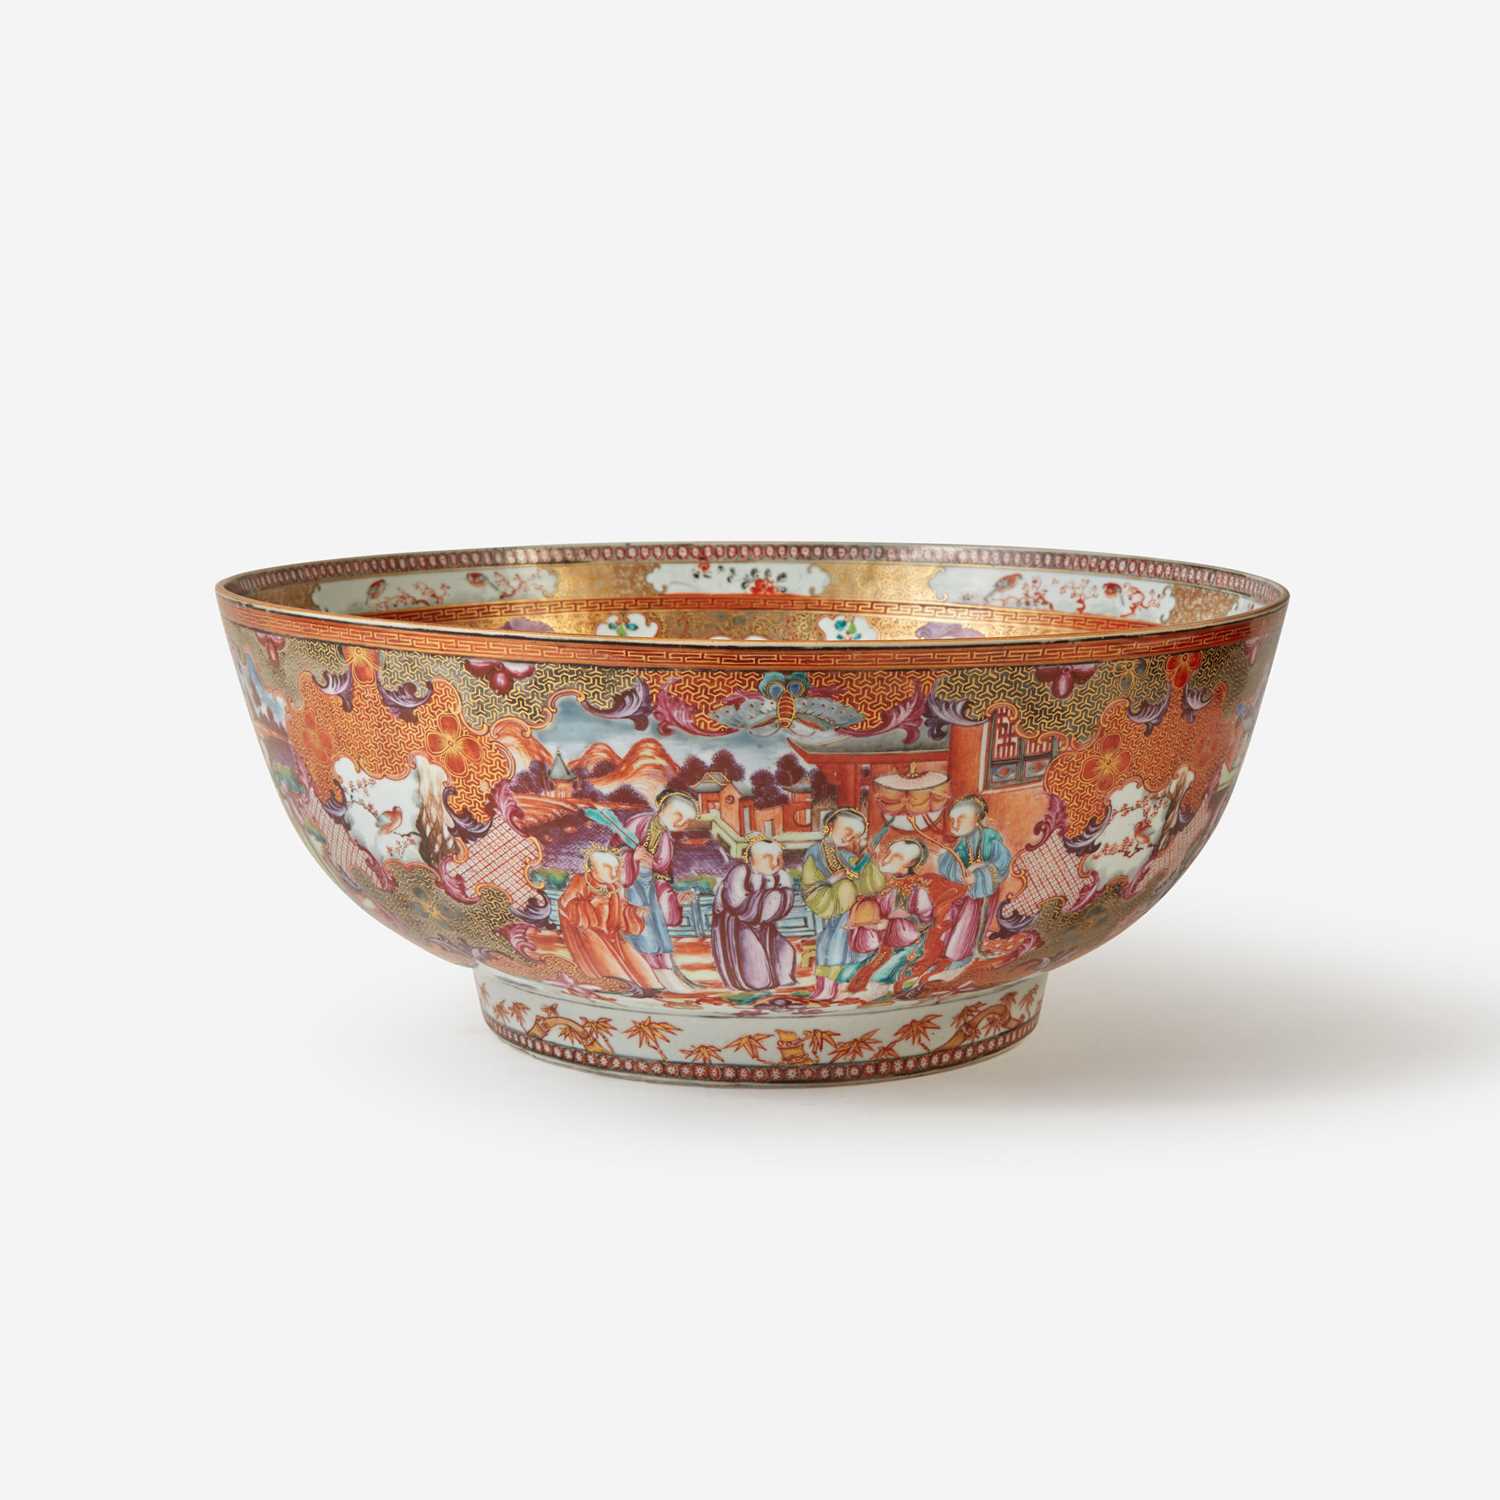 Lot 97 - A Large Chinese Export Porcelain Punch Bowl